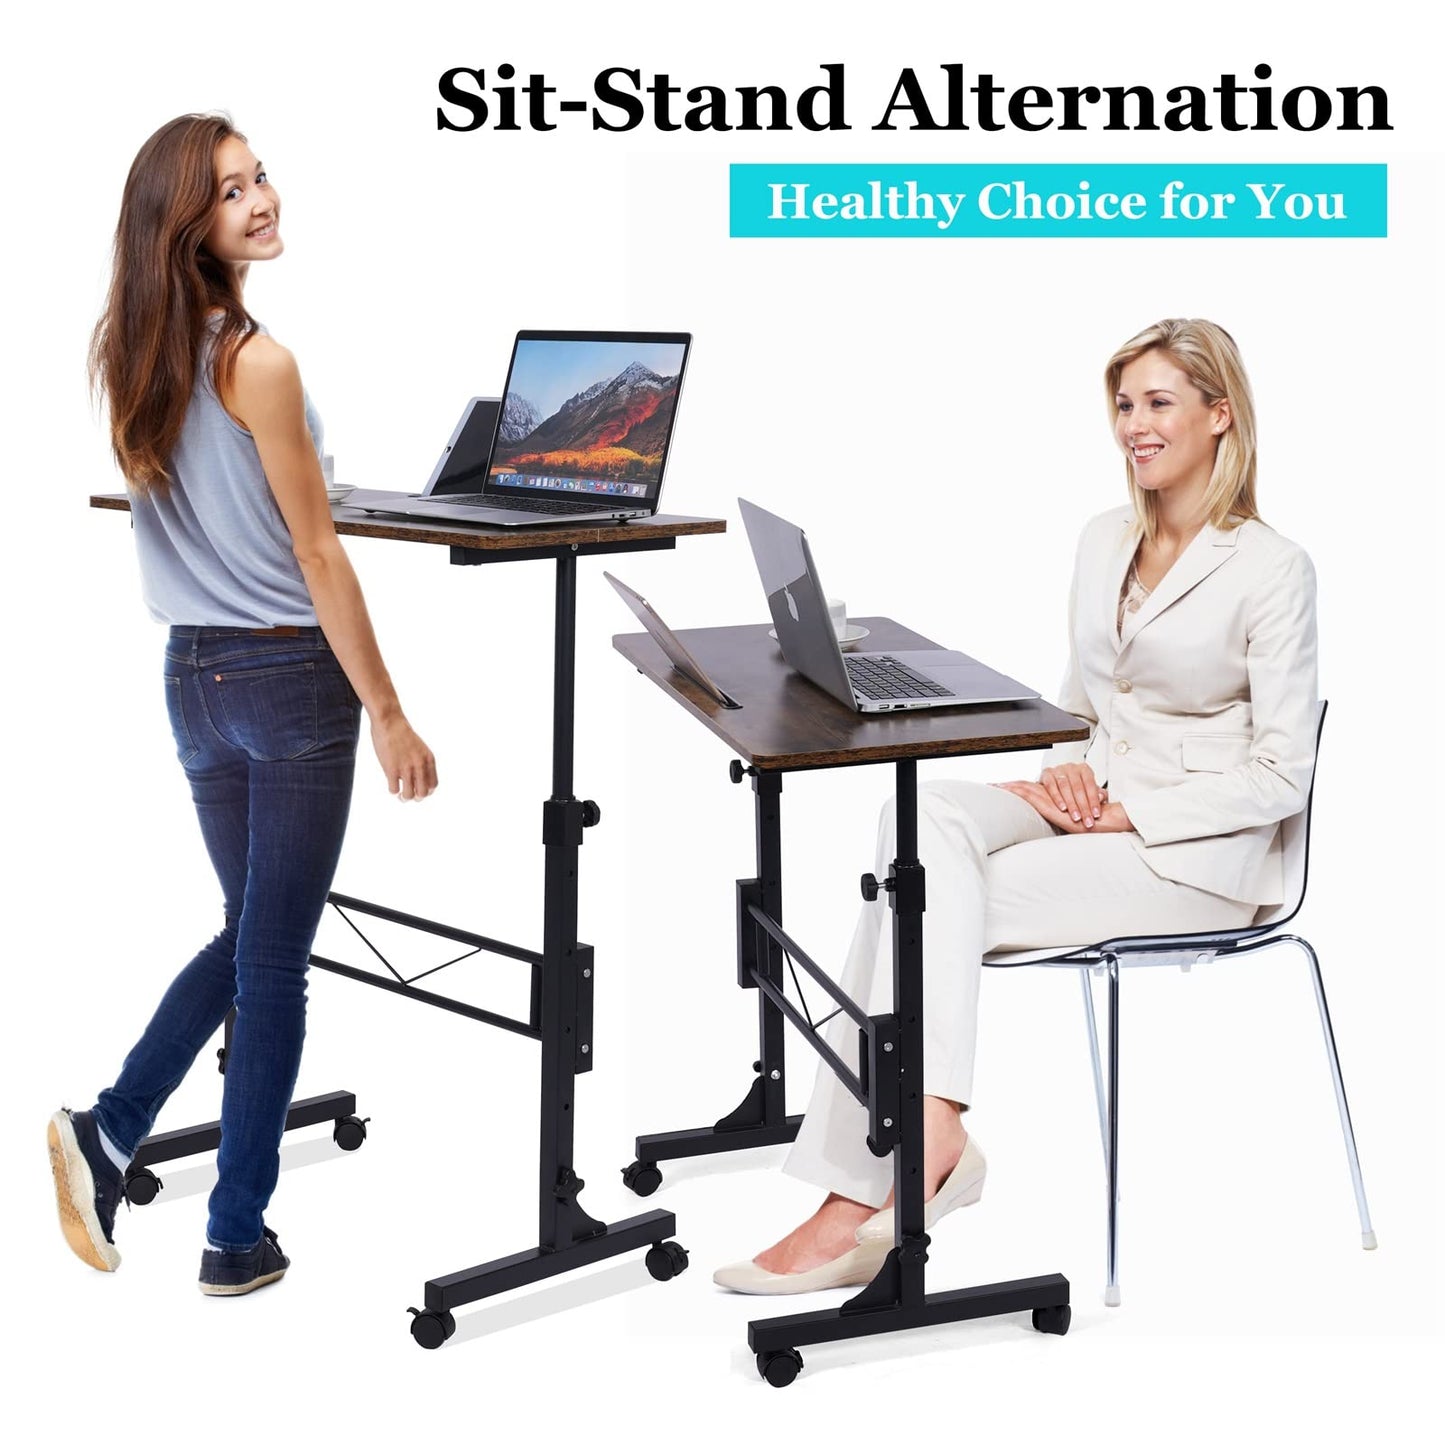 Standing Desk Adjustable Height, Mobile Stand Up Desk with Wheels Small Computer Desk Rolling Desk, Portable Laptop Desk Rustic Standing Table Sit Stand Home Office Desks 16"x31.5" Height 27"-43.5"